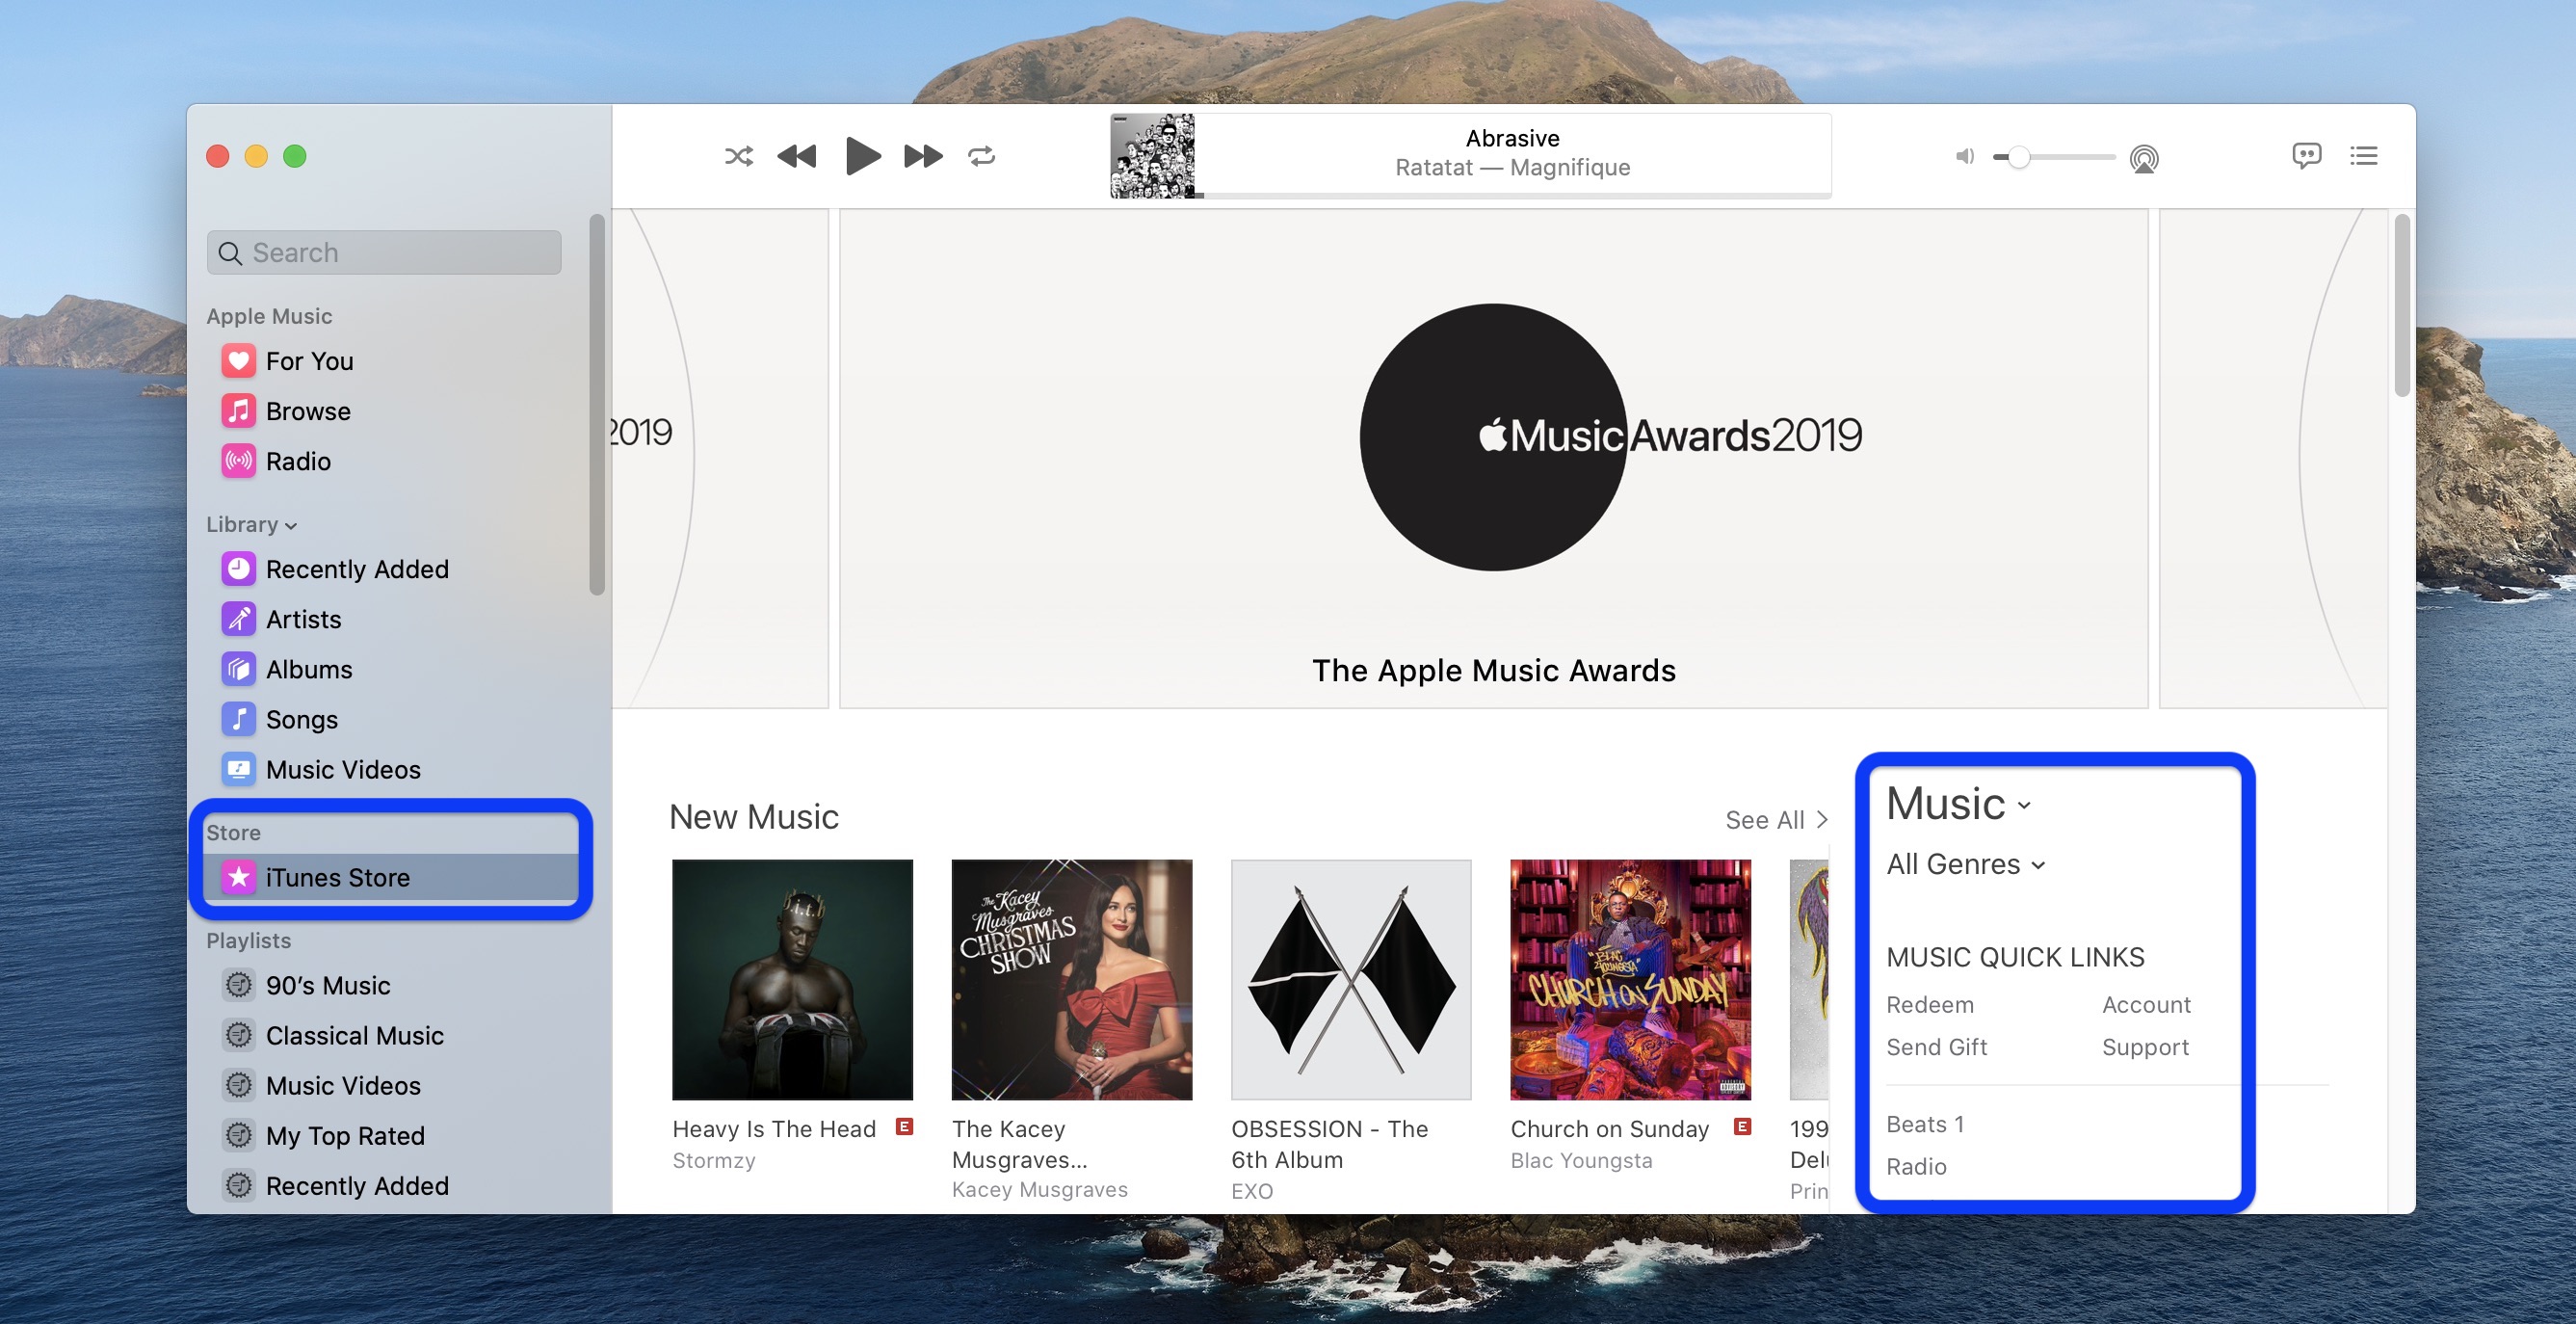 itunes for macos catalina 10.15 6 download